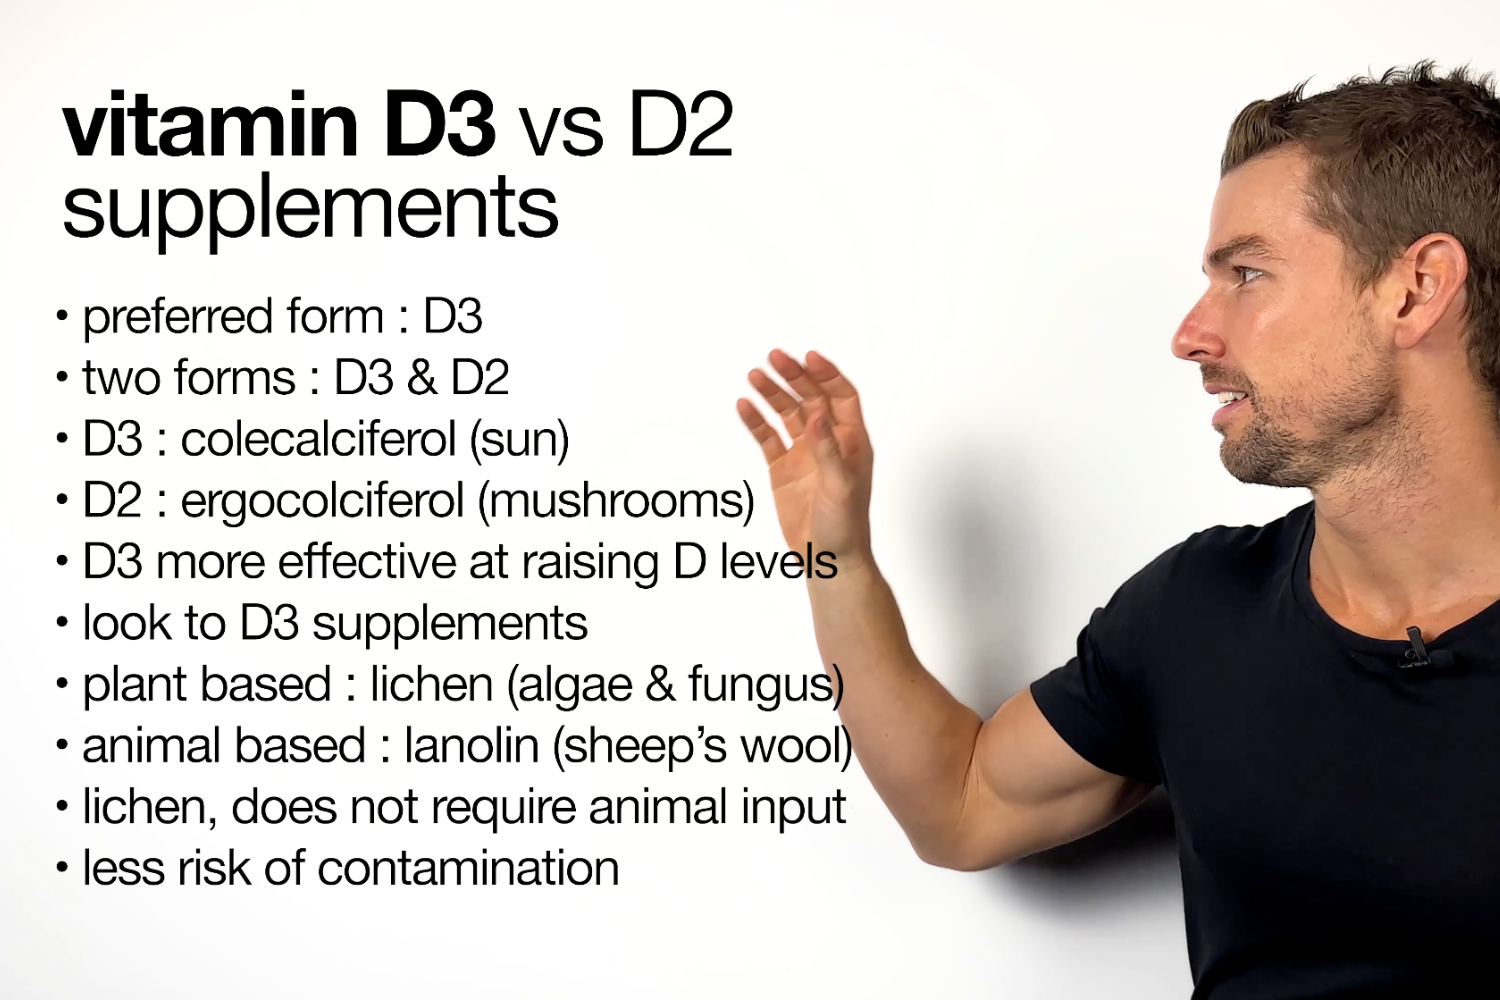 Vitamin D3 vs Vitamin D2 Supplements: Which Is Better?